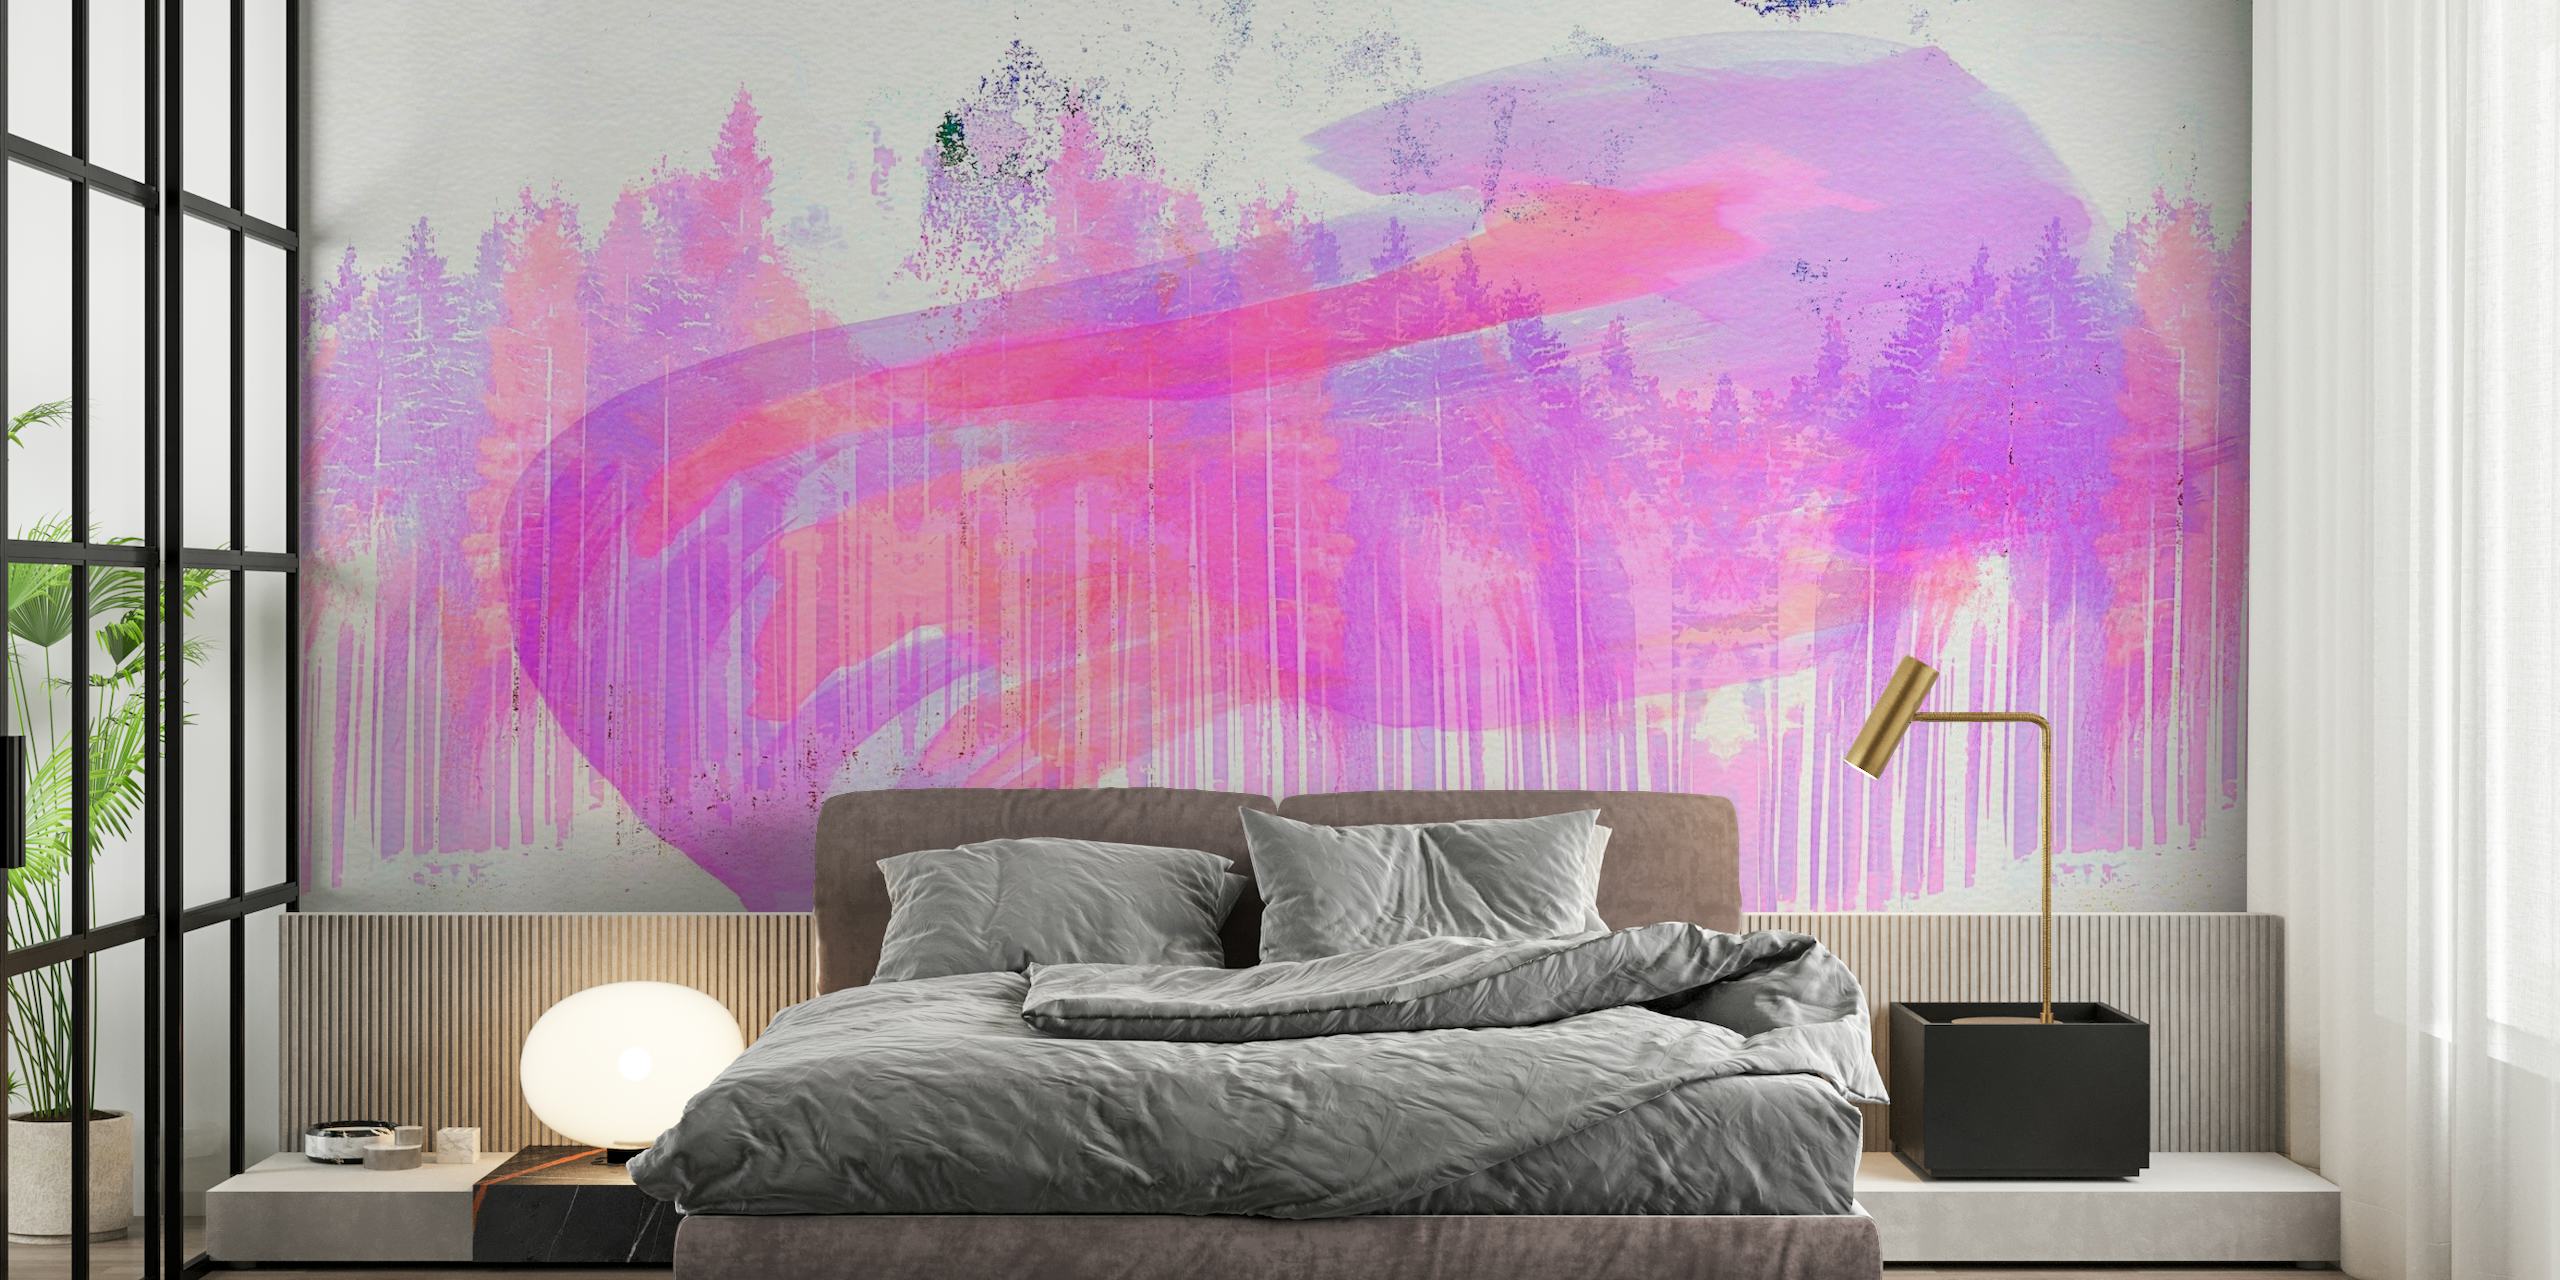 Abstract pink forest wall mural with ethereal splash design